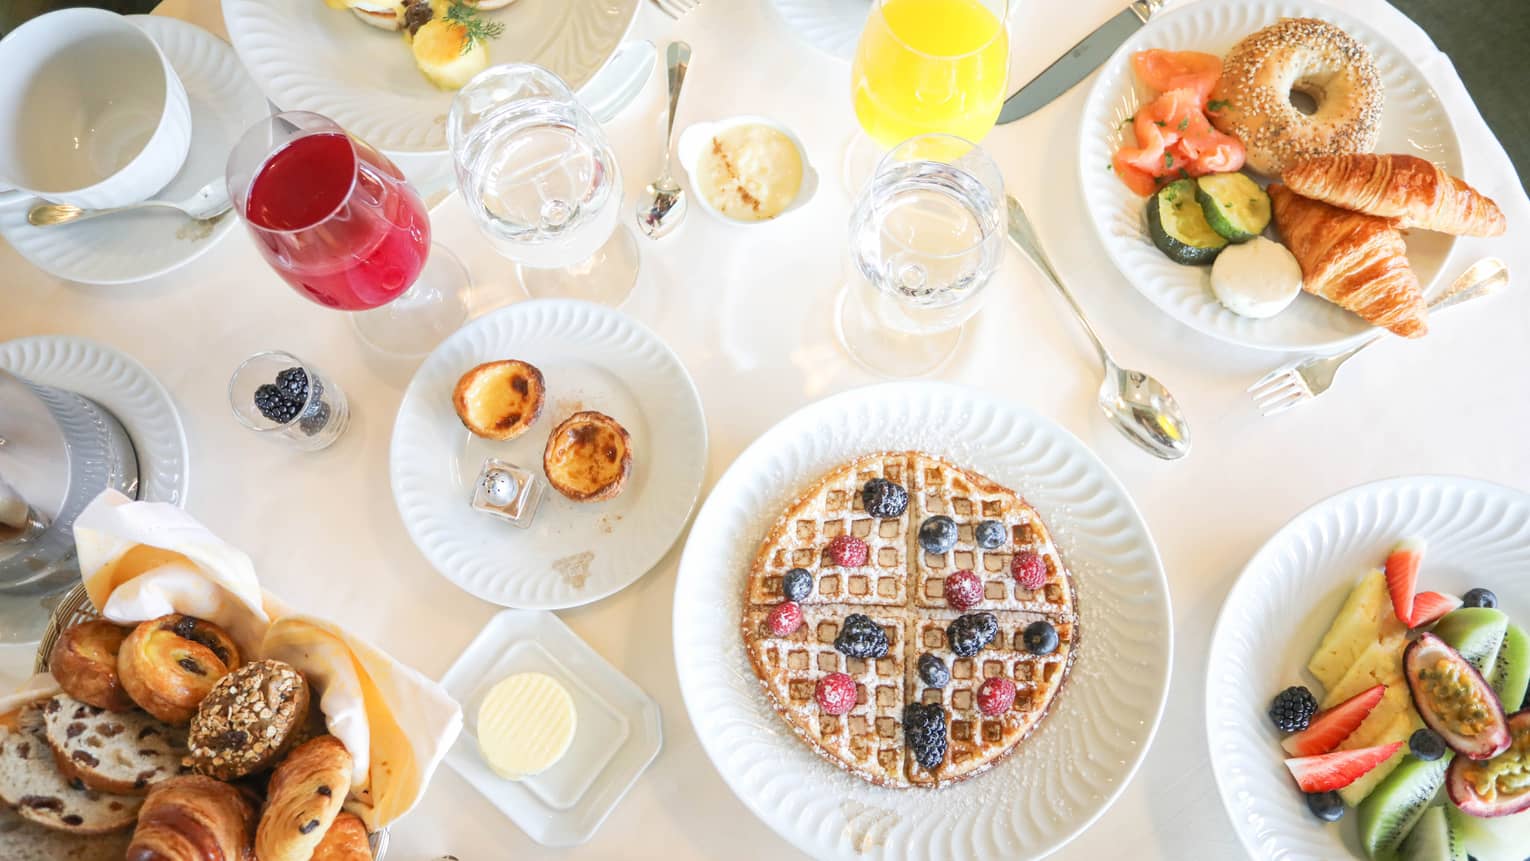 Aerial view of breakfast table with waffles, fresh fruit, pastries and juice in wine glasses